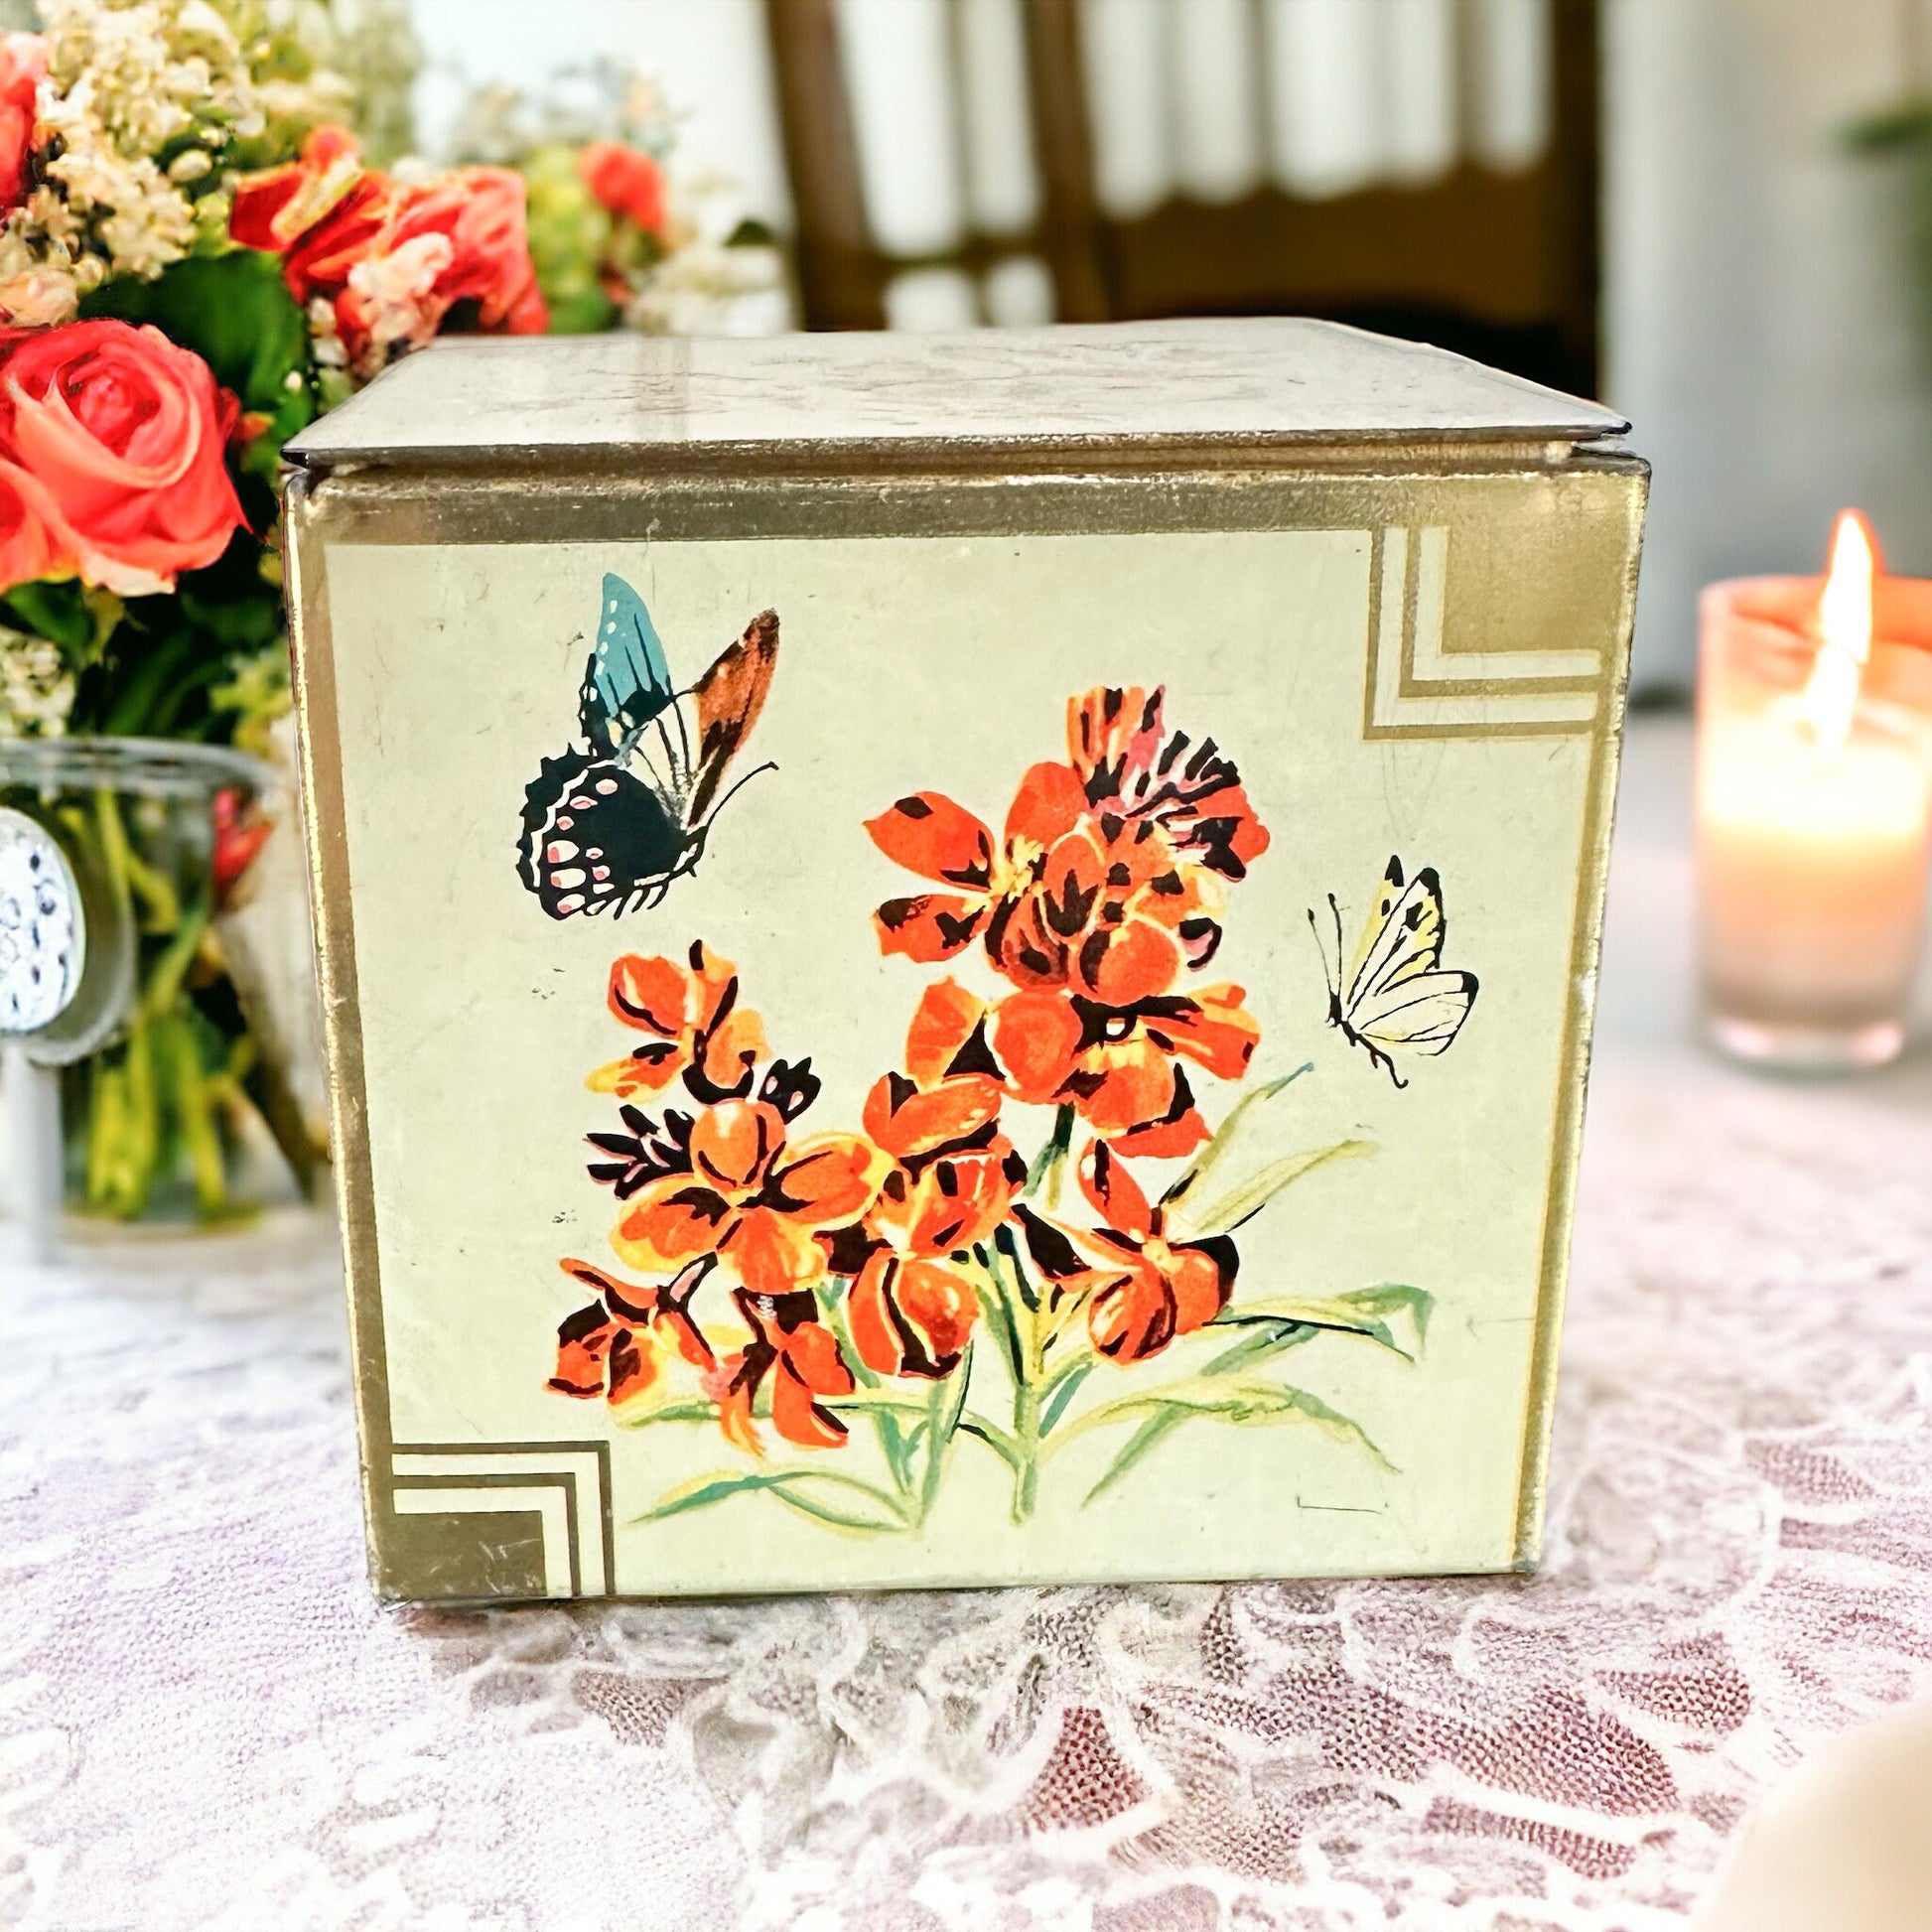 Soy Candle, Vintage Tins, Birthday Gifts for Mom, Unique Gifts for Her